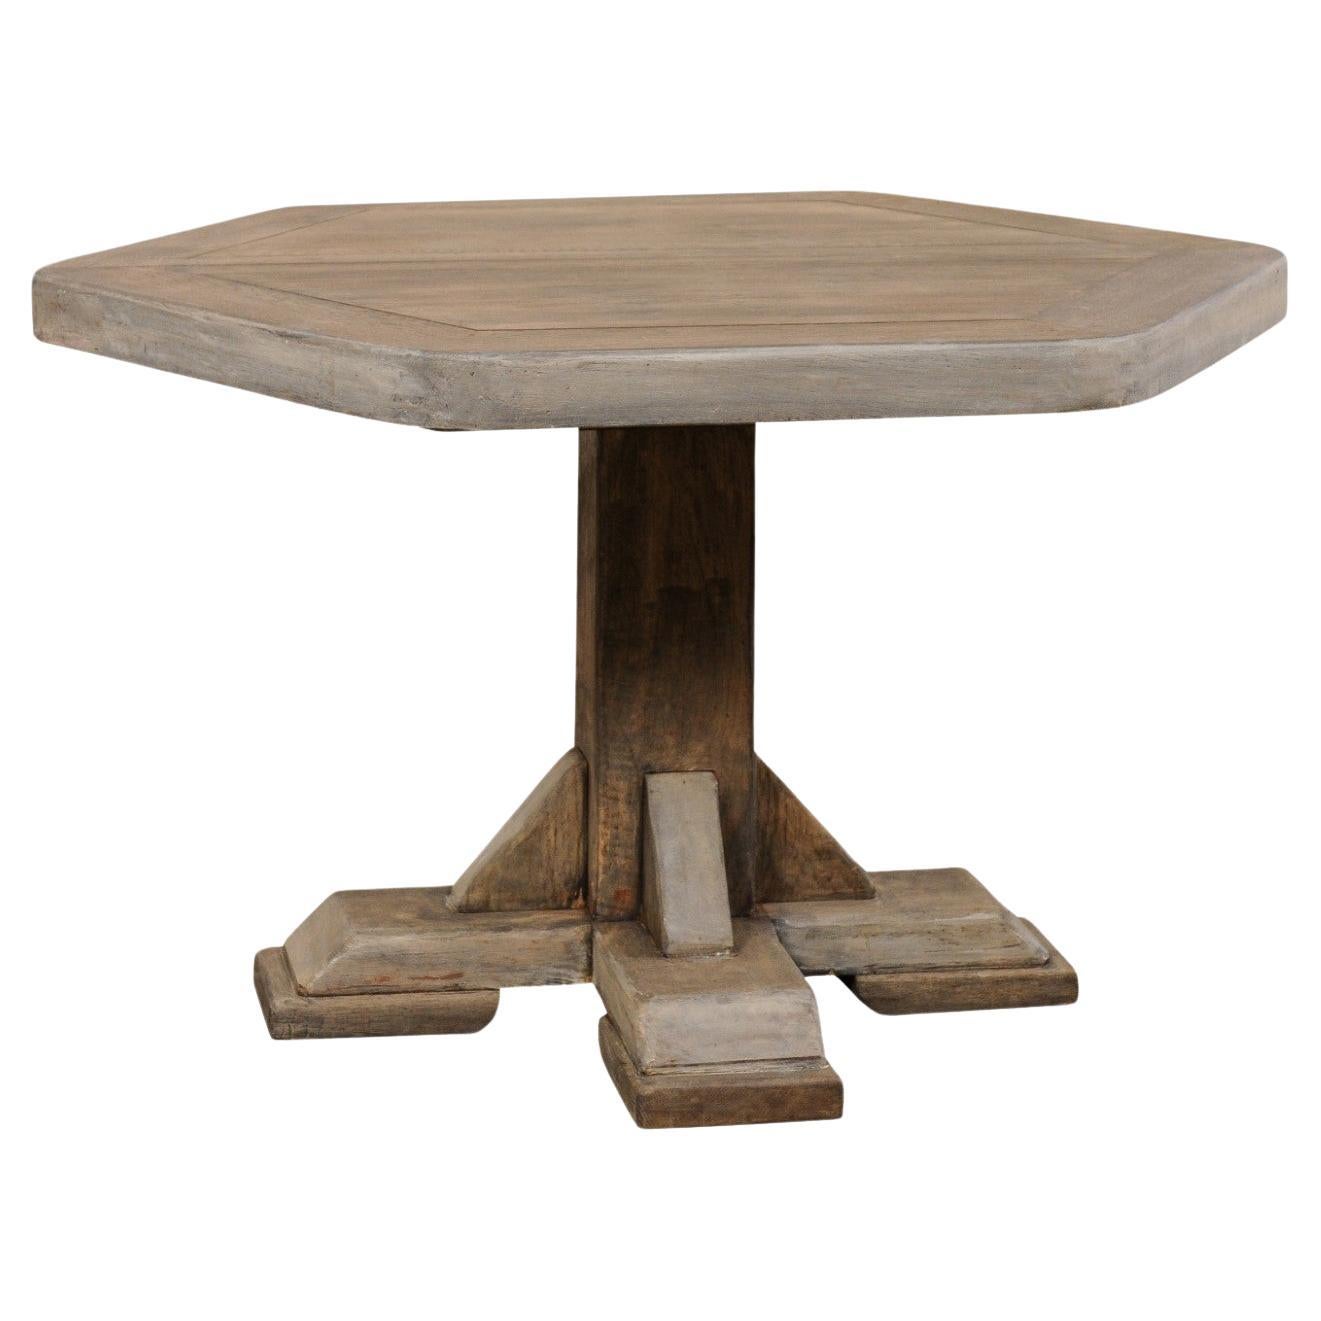 European Hexagon-Shaped Wooden Pedestal Table, Mid 20th century For Sale